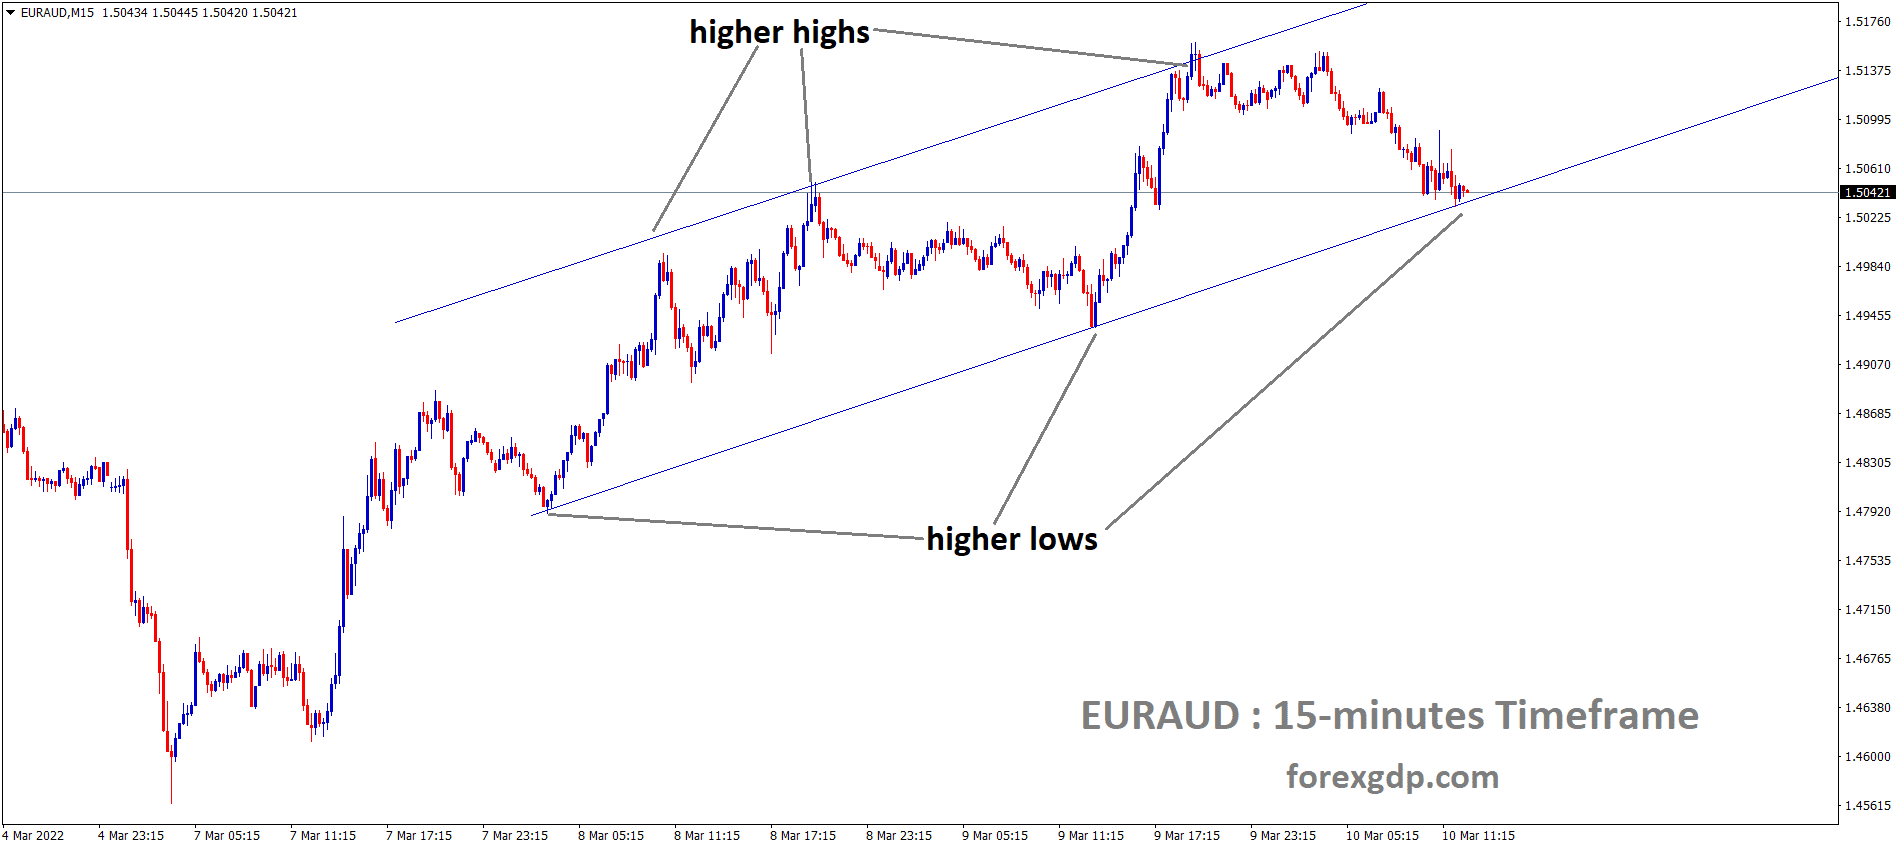 EURAUD is moving in an Ascending channel and the market has reached the higher low area of the Ascending channel